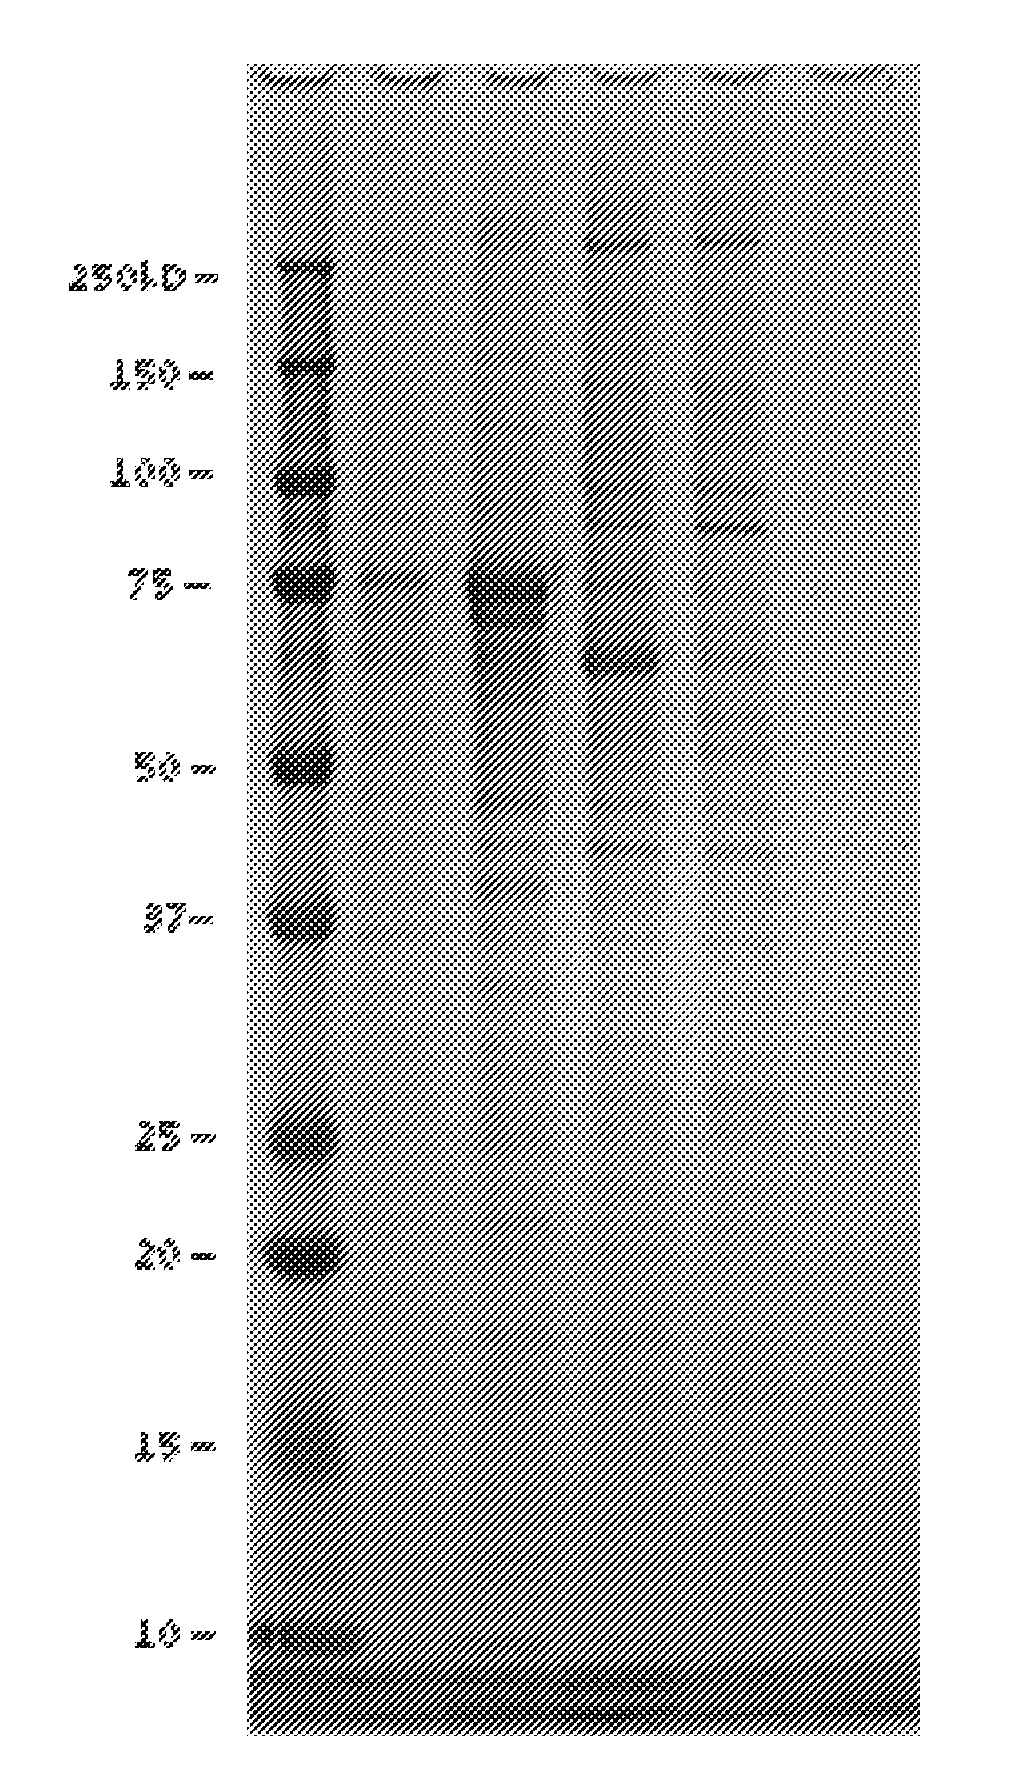 Methods of modulating the negative chemotaxis of immune cells